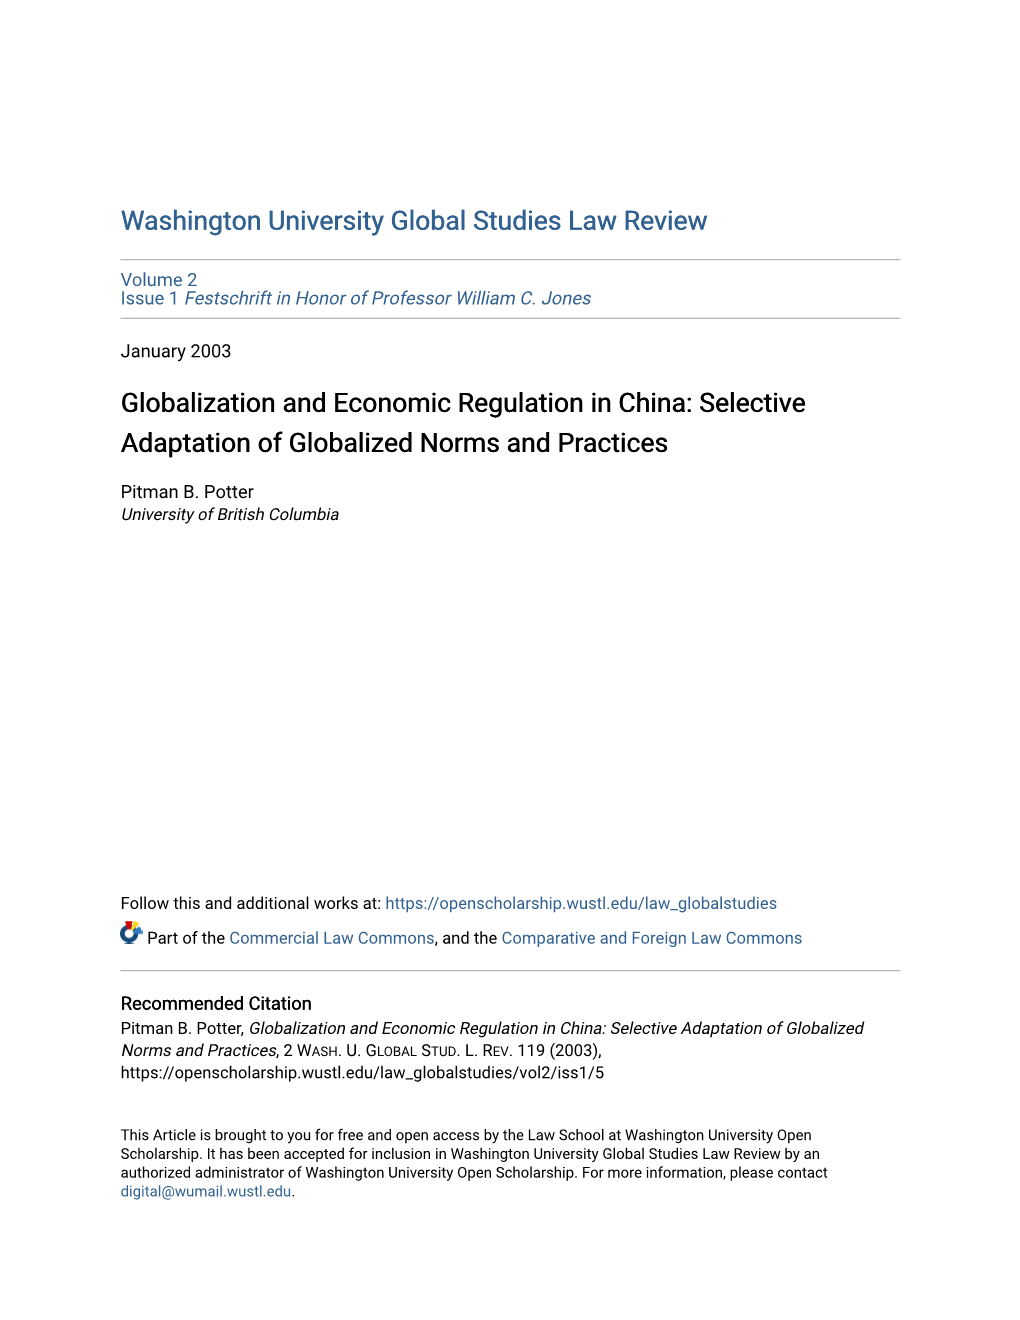 Globalization and Economic Regulation in China: Selective Adaptation of Globalized Norms and Practices